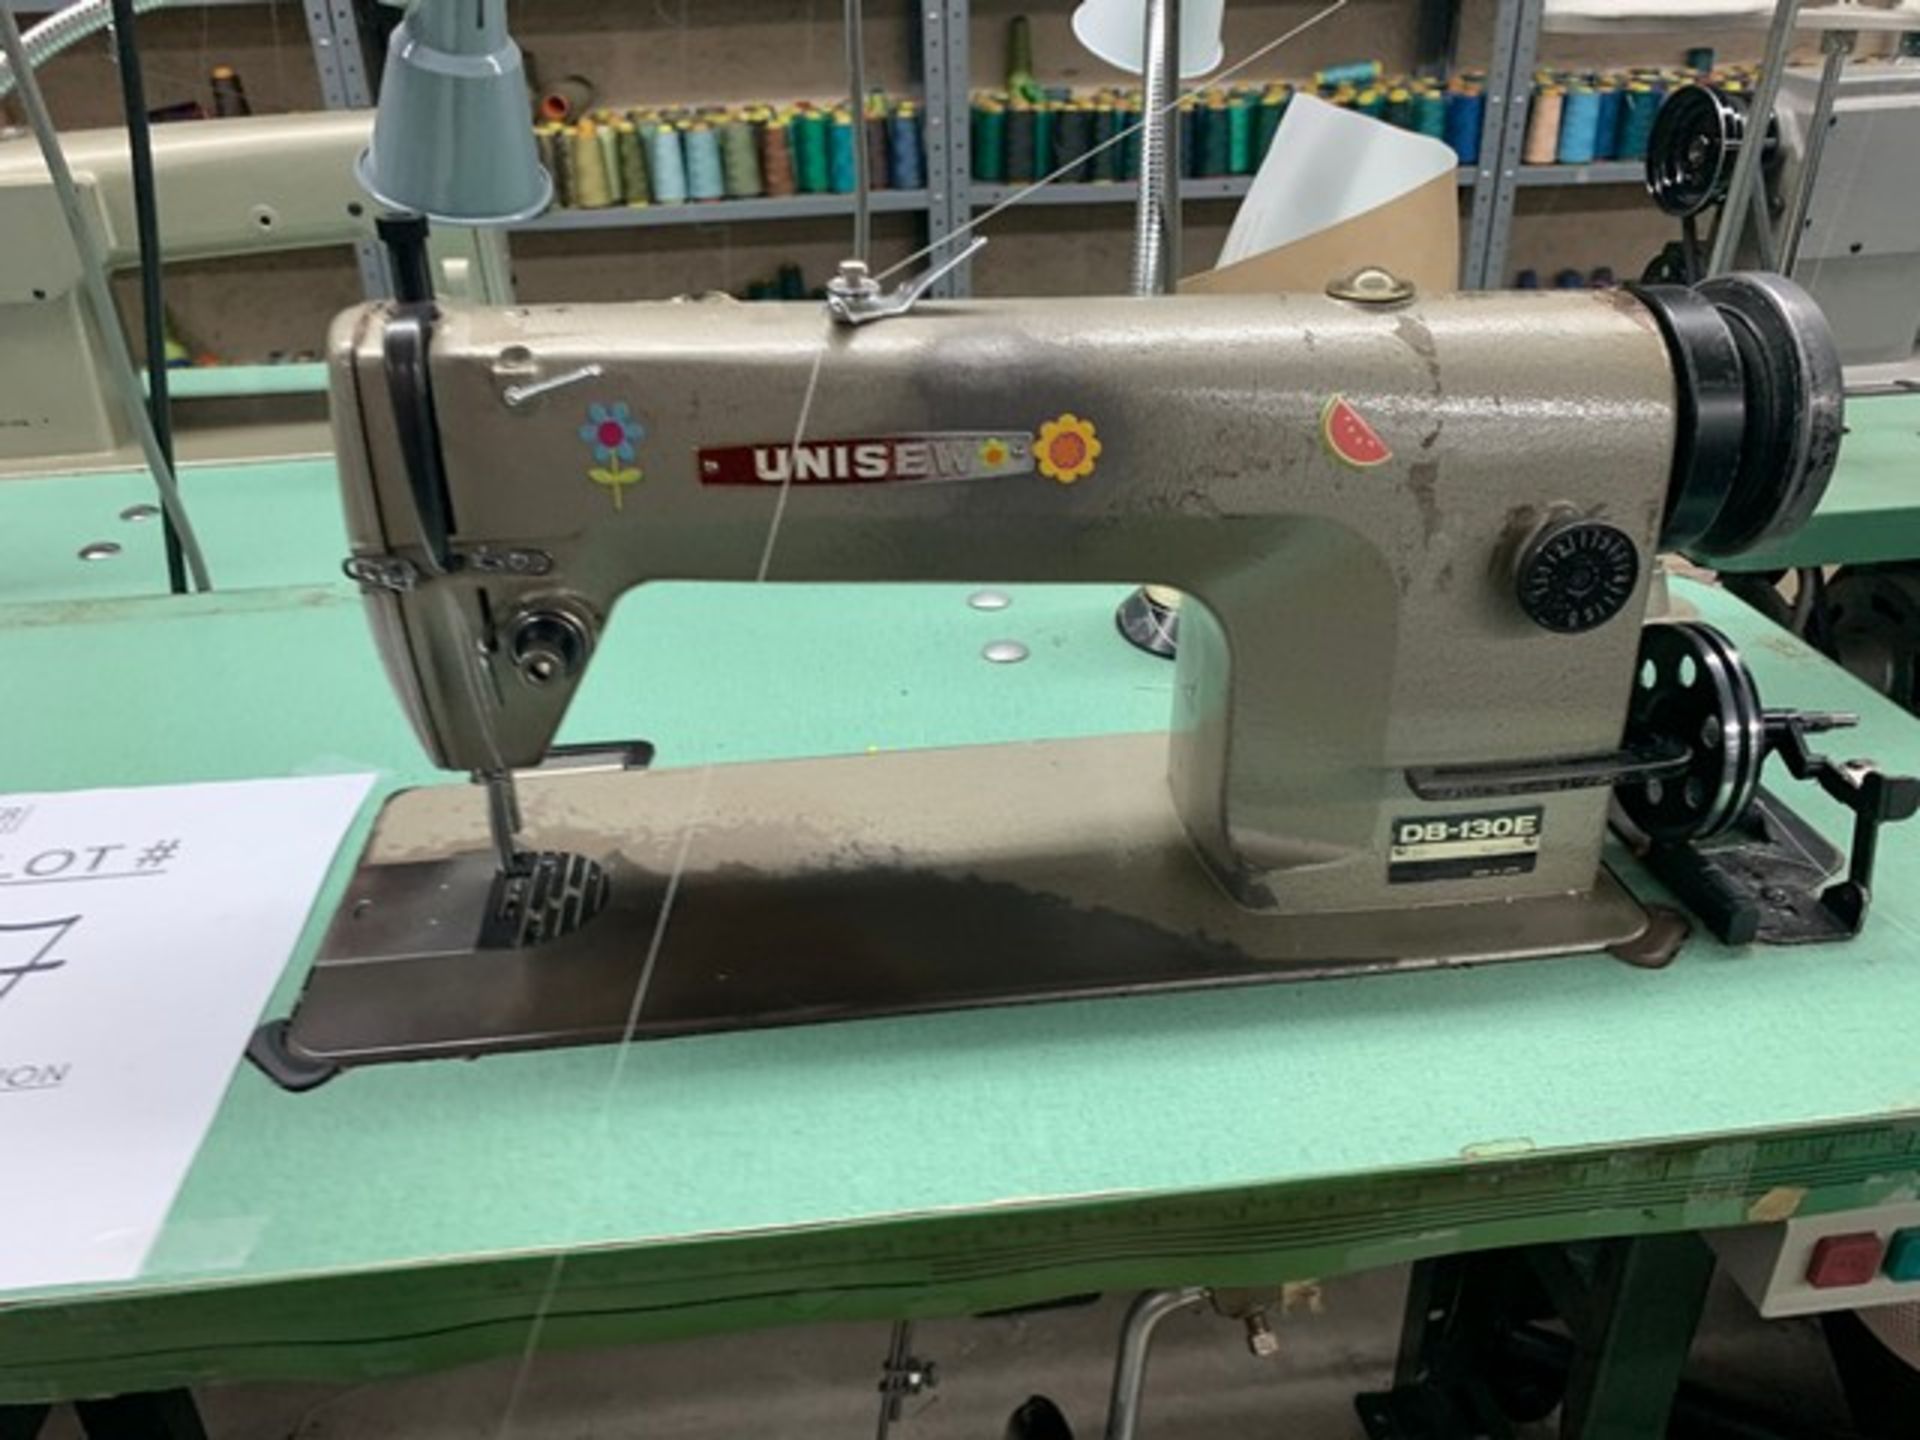 UNISEW DSN-178-2 SEWING MACHINE WITH MOTOR & STAND - Image 2 of 2